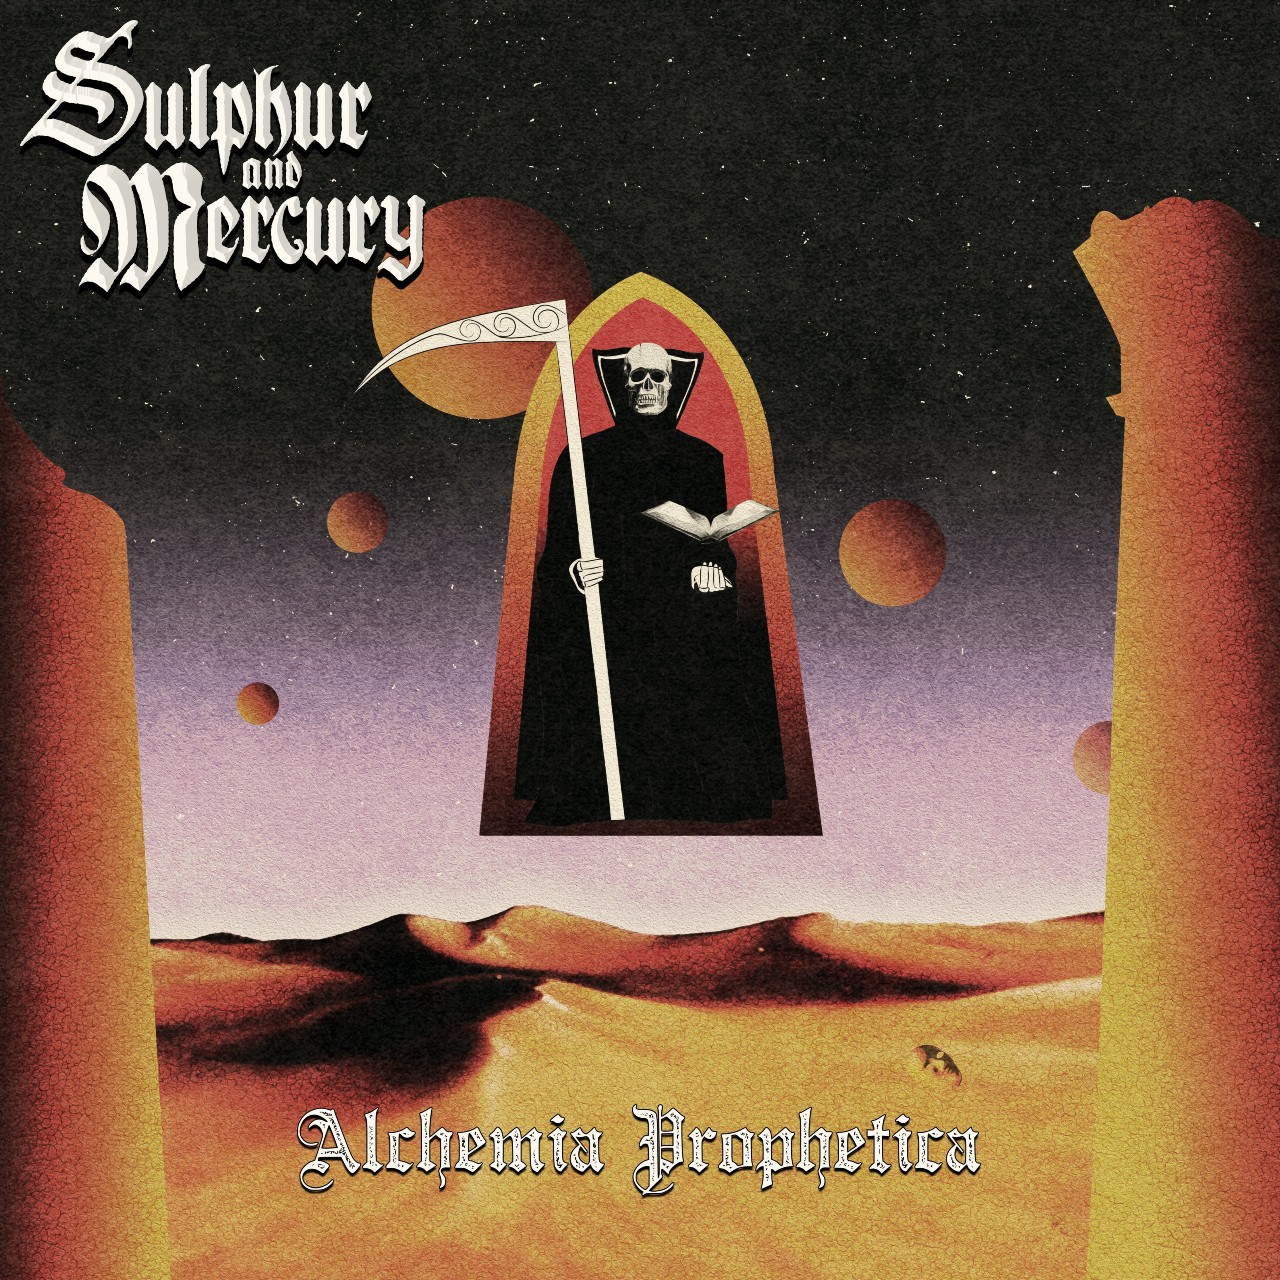 SULPHUR AND MERCURY: new heavy metal powerhouse, featuring members of Misery Index, Hour Of Penance and Spiritual Front, shares first single “Lightless Slumber”